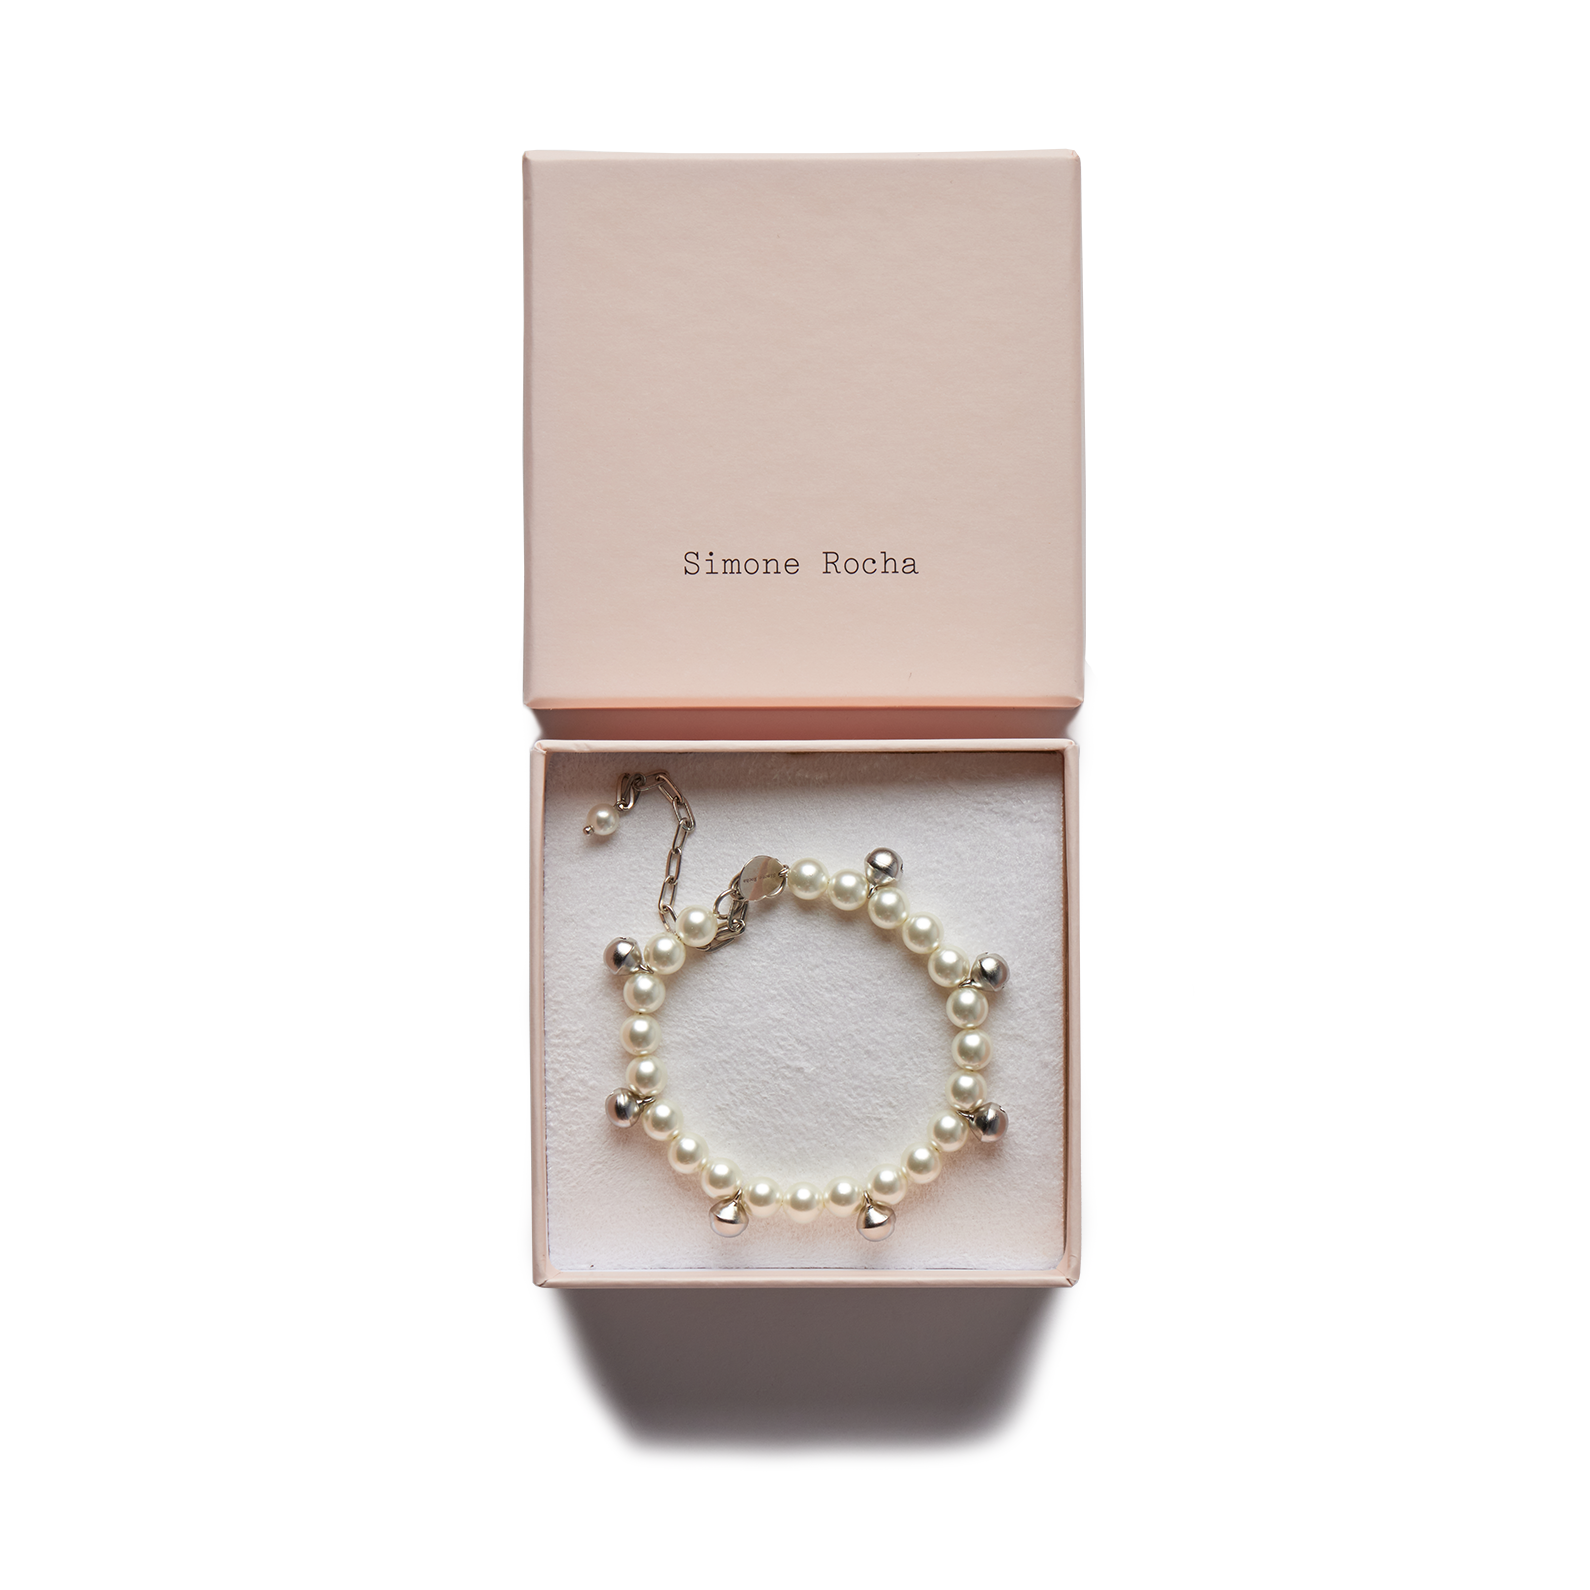 SIMONE ROCHA - Bell Charm And Pearl Bracelet product image